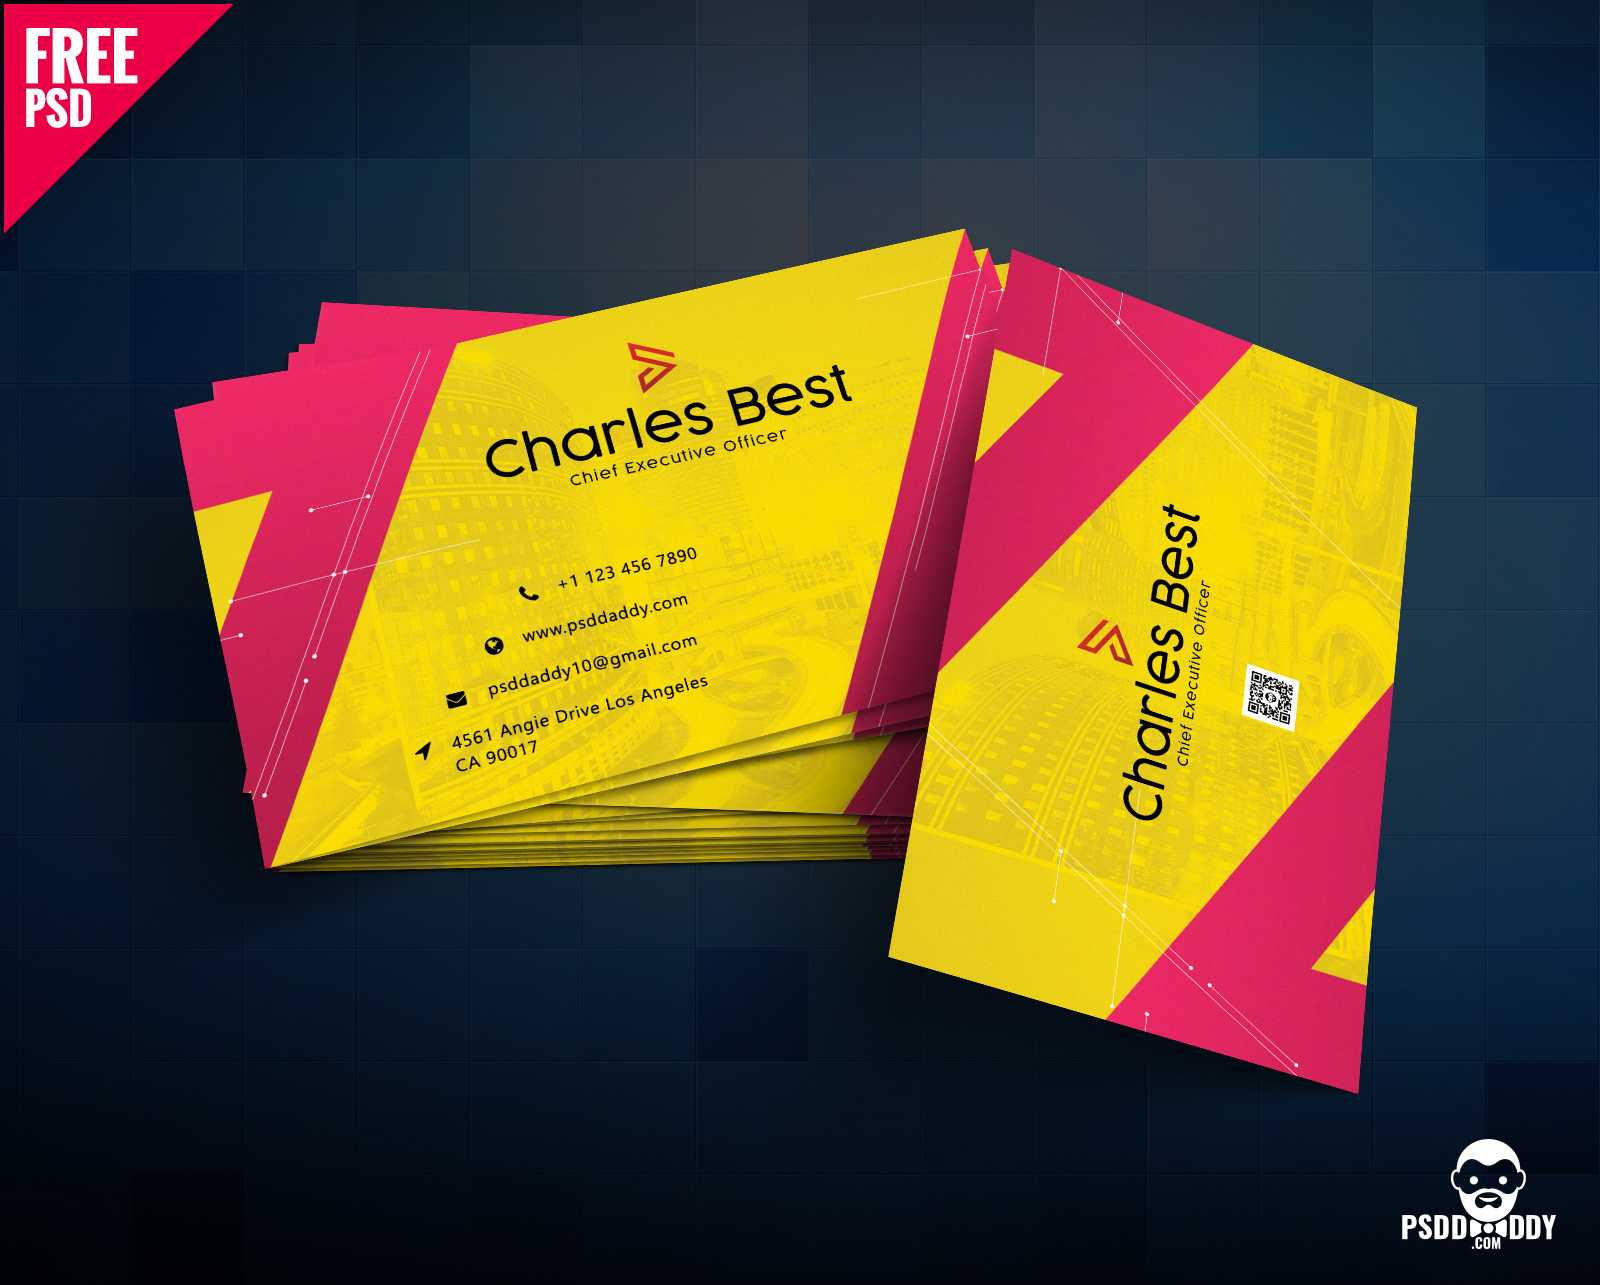 Download] Creative Business Card Free Psd | Psddaddy Throughout Calling Card Template Psd